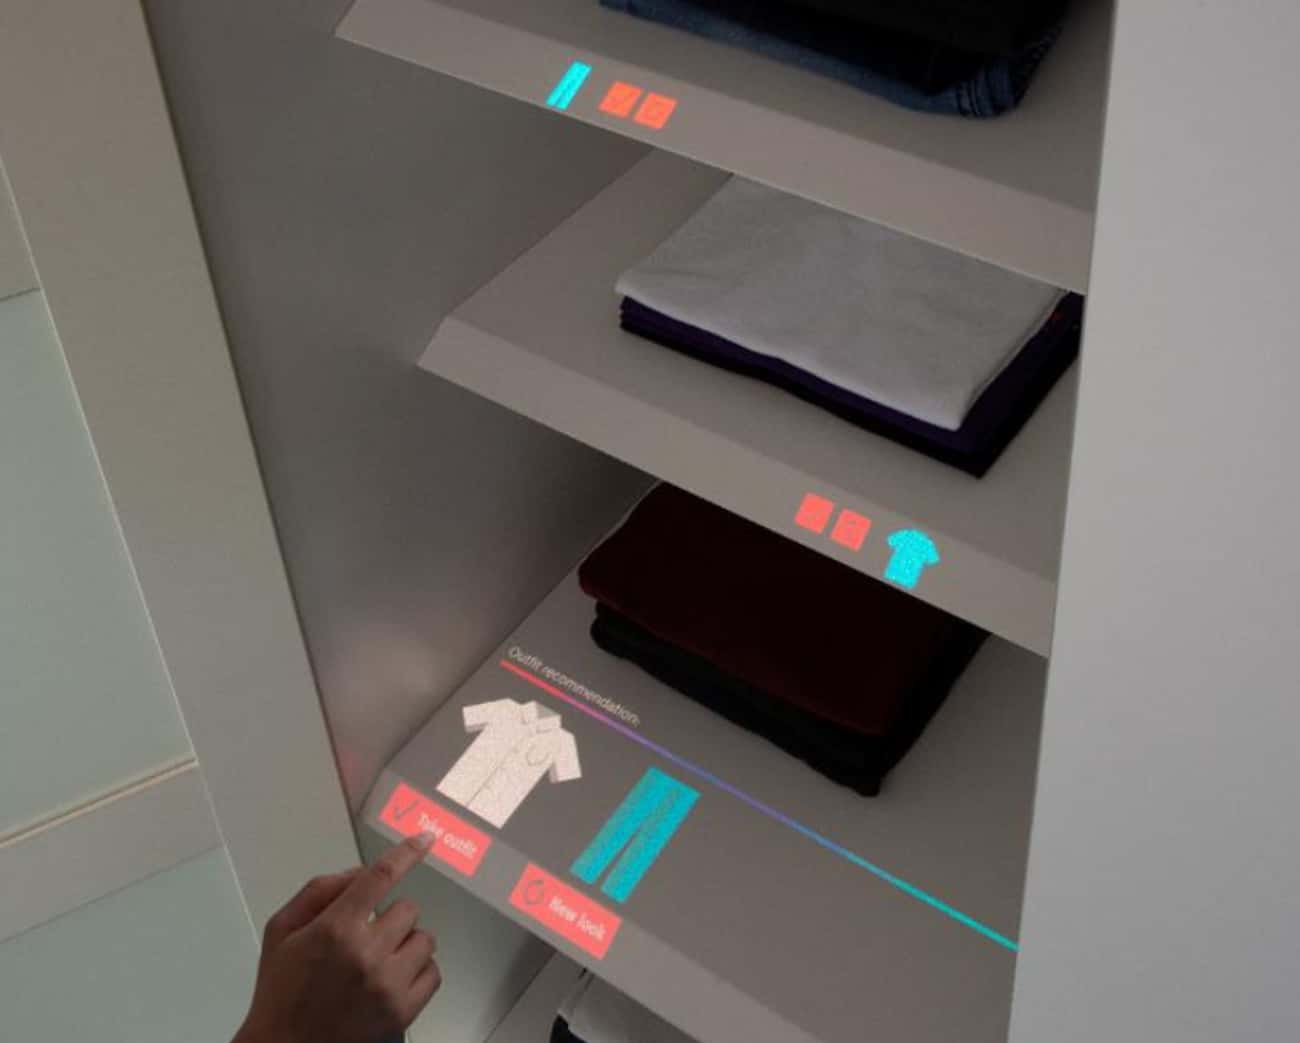 This Interactive Projection Module Makes Everything A Touchscreen